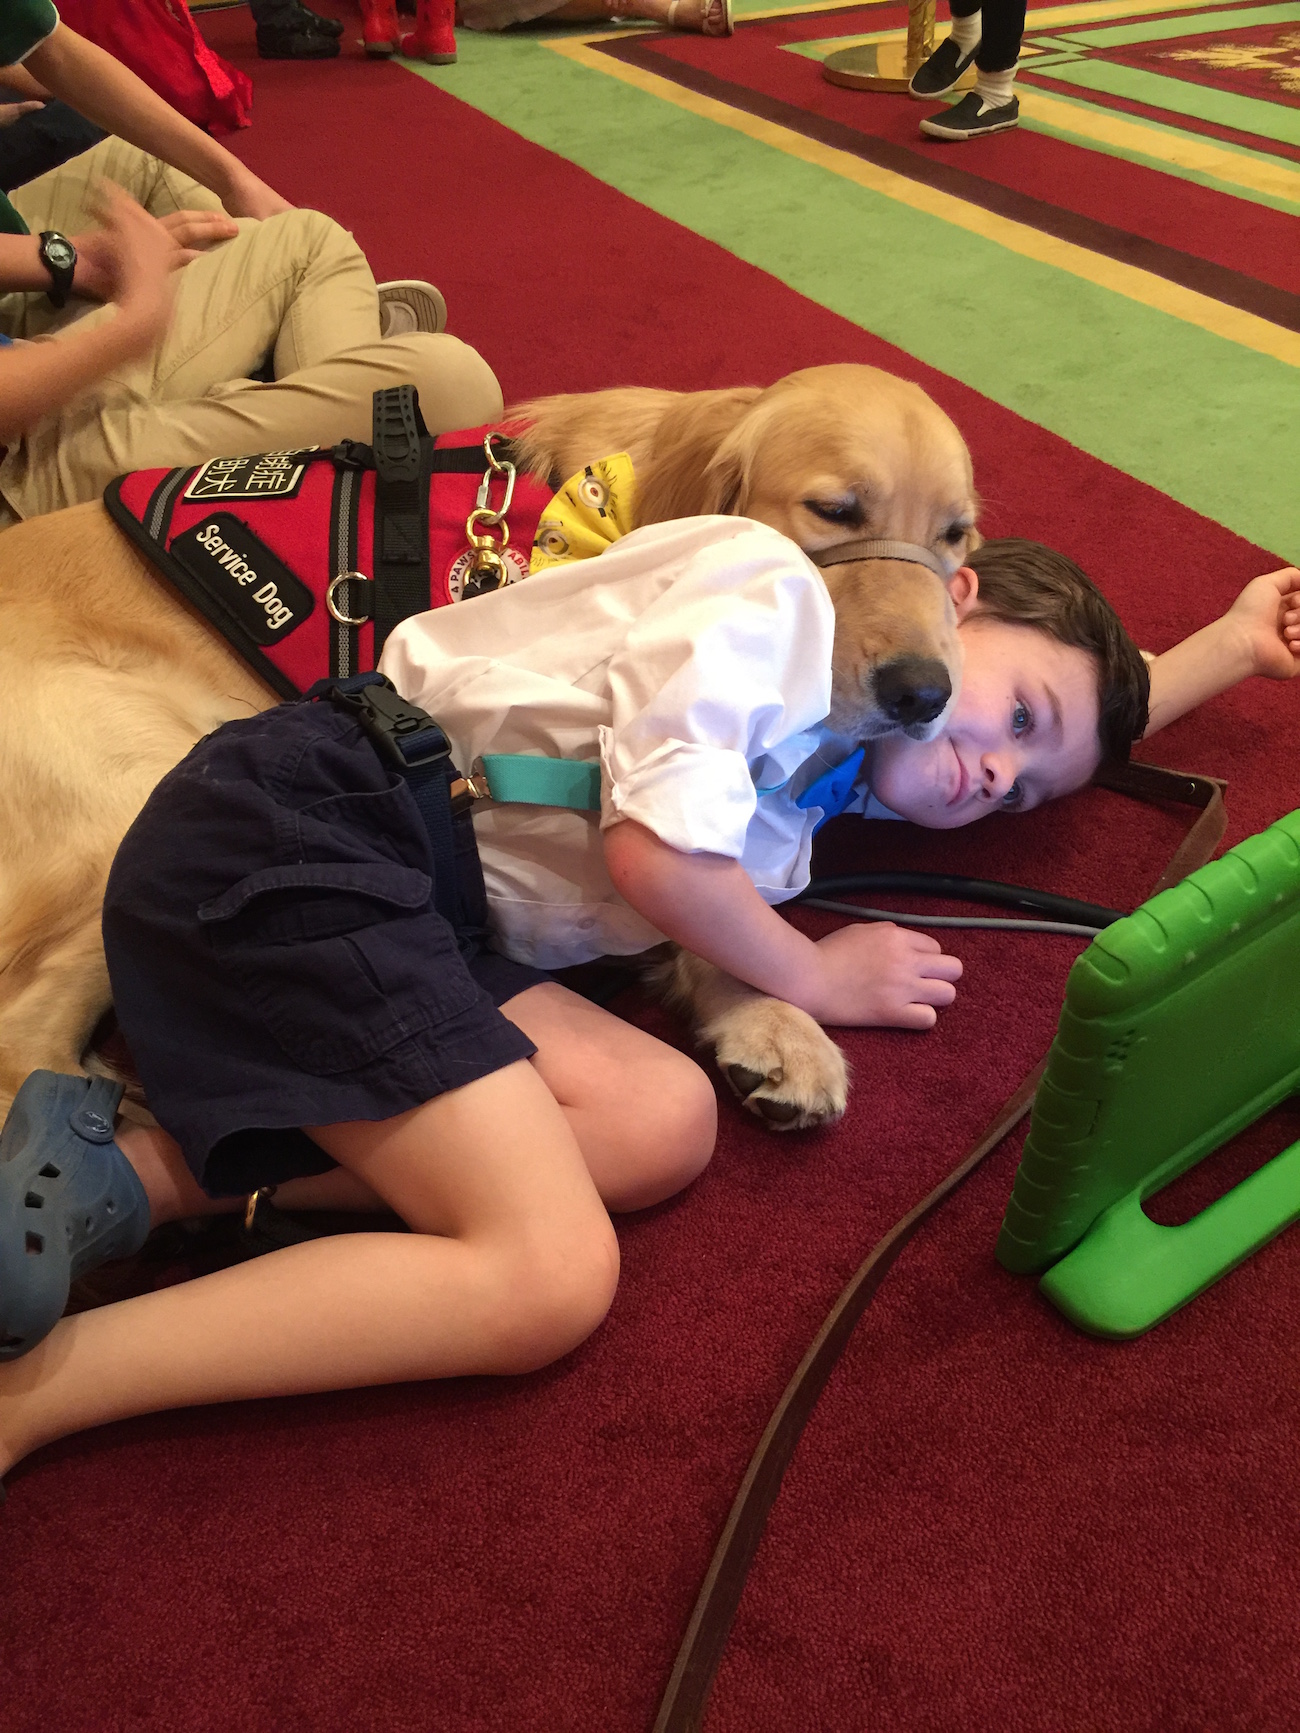 The author's son Kai and Tornado his service dog lying on the carpeted floor, watching an iPad